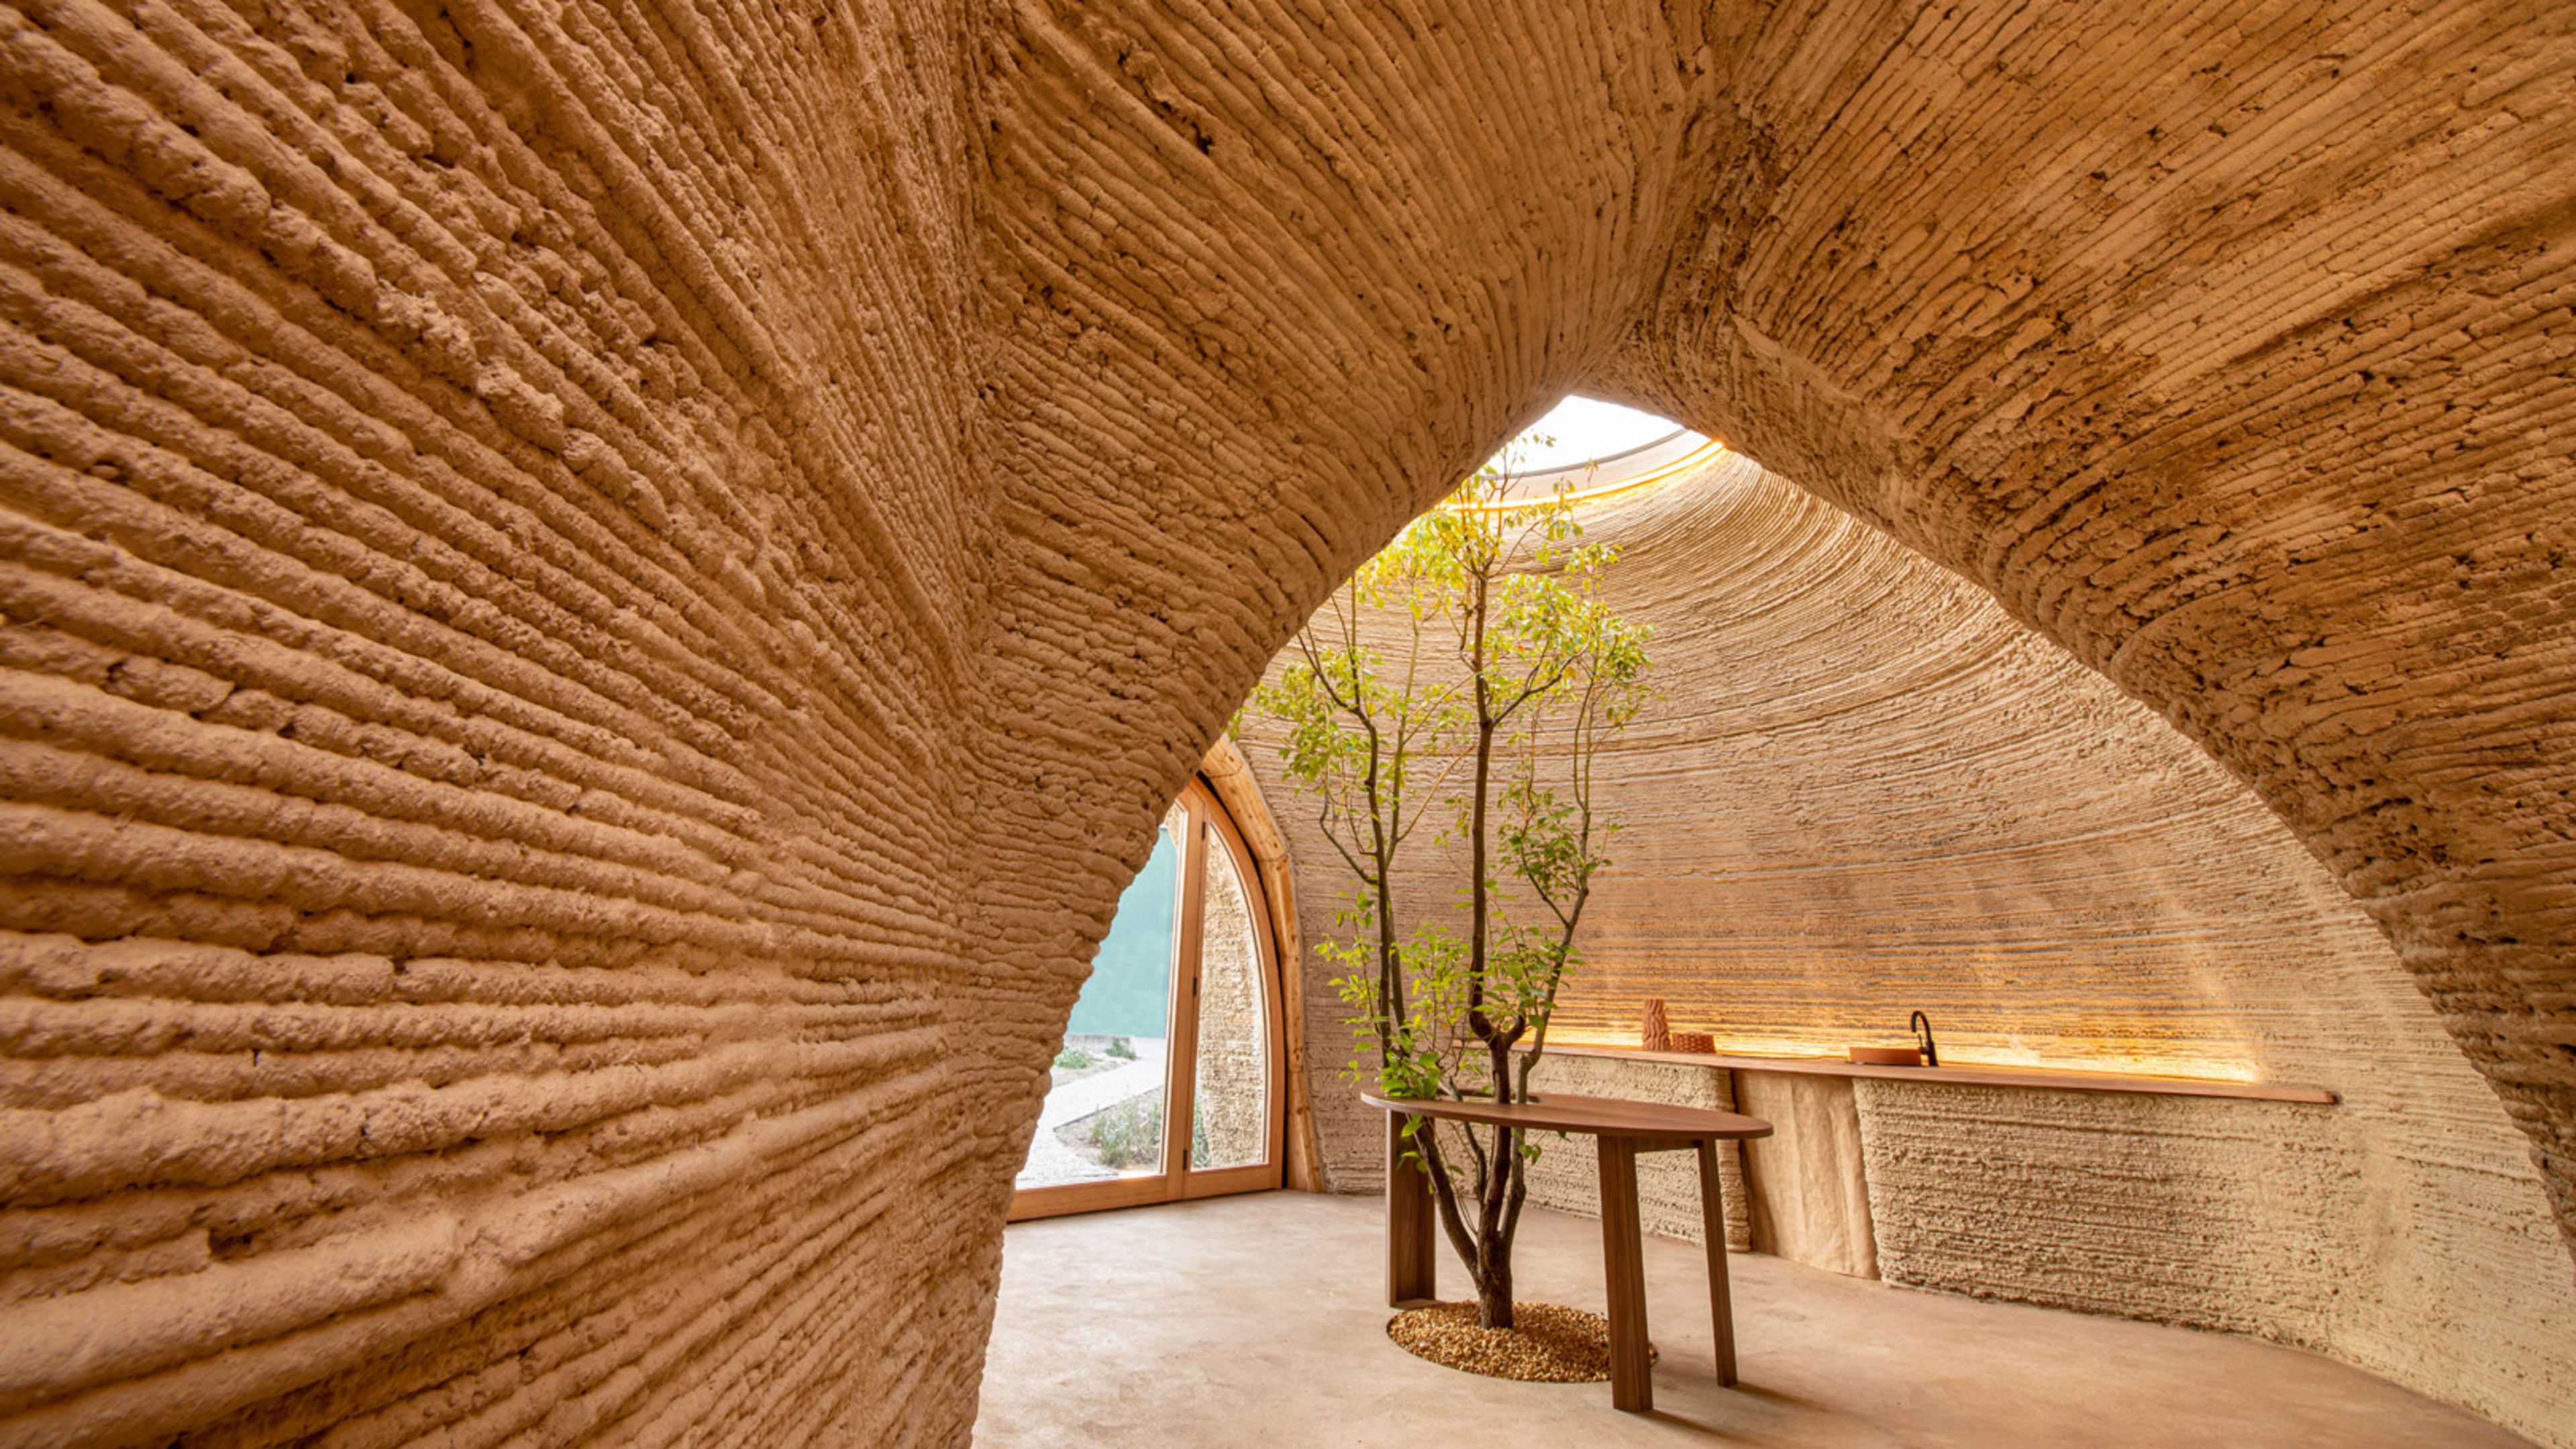 This wild-looking house is made out of dirt by a giant 3D printer